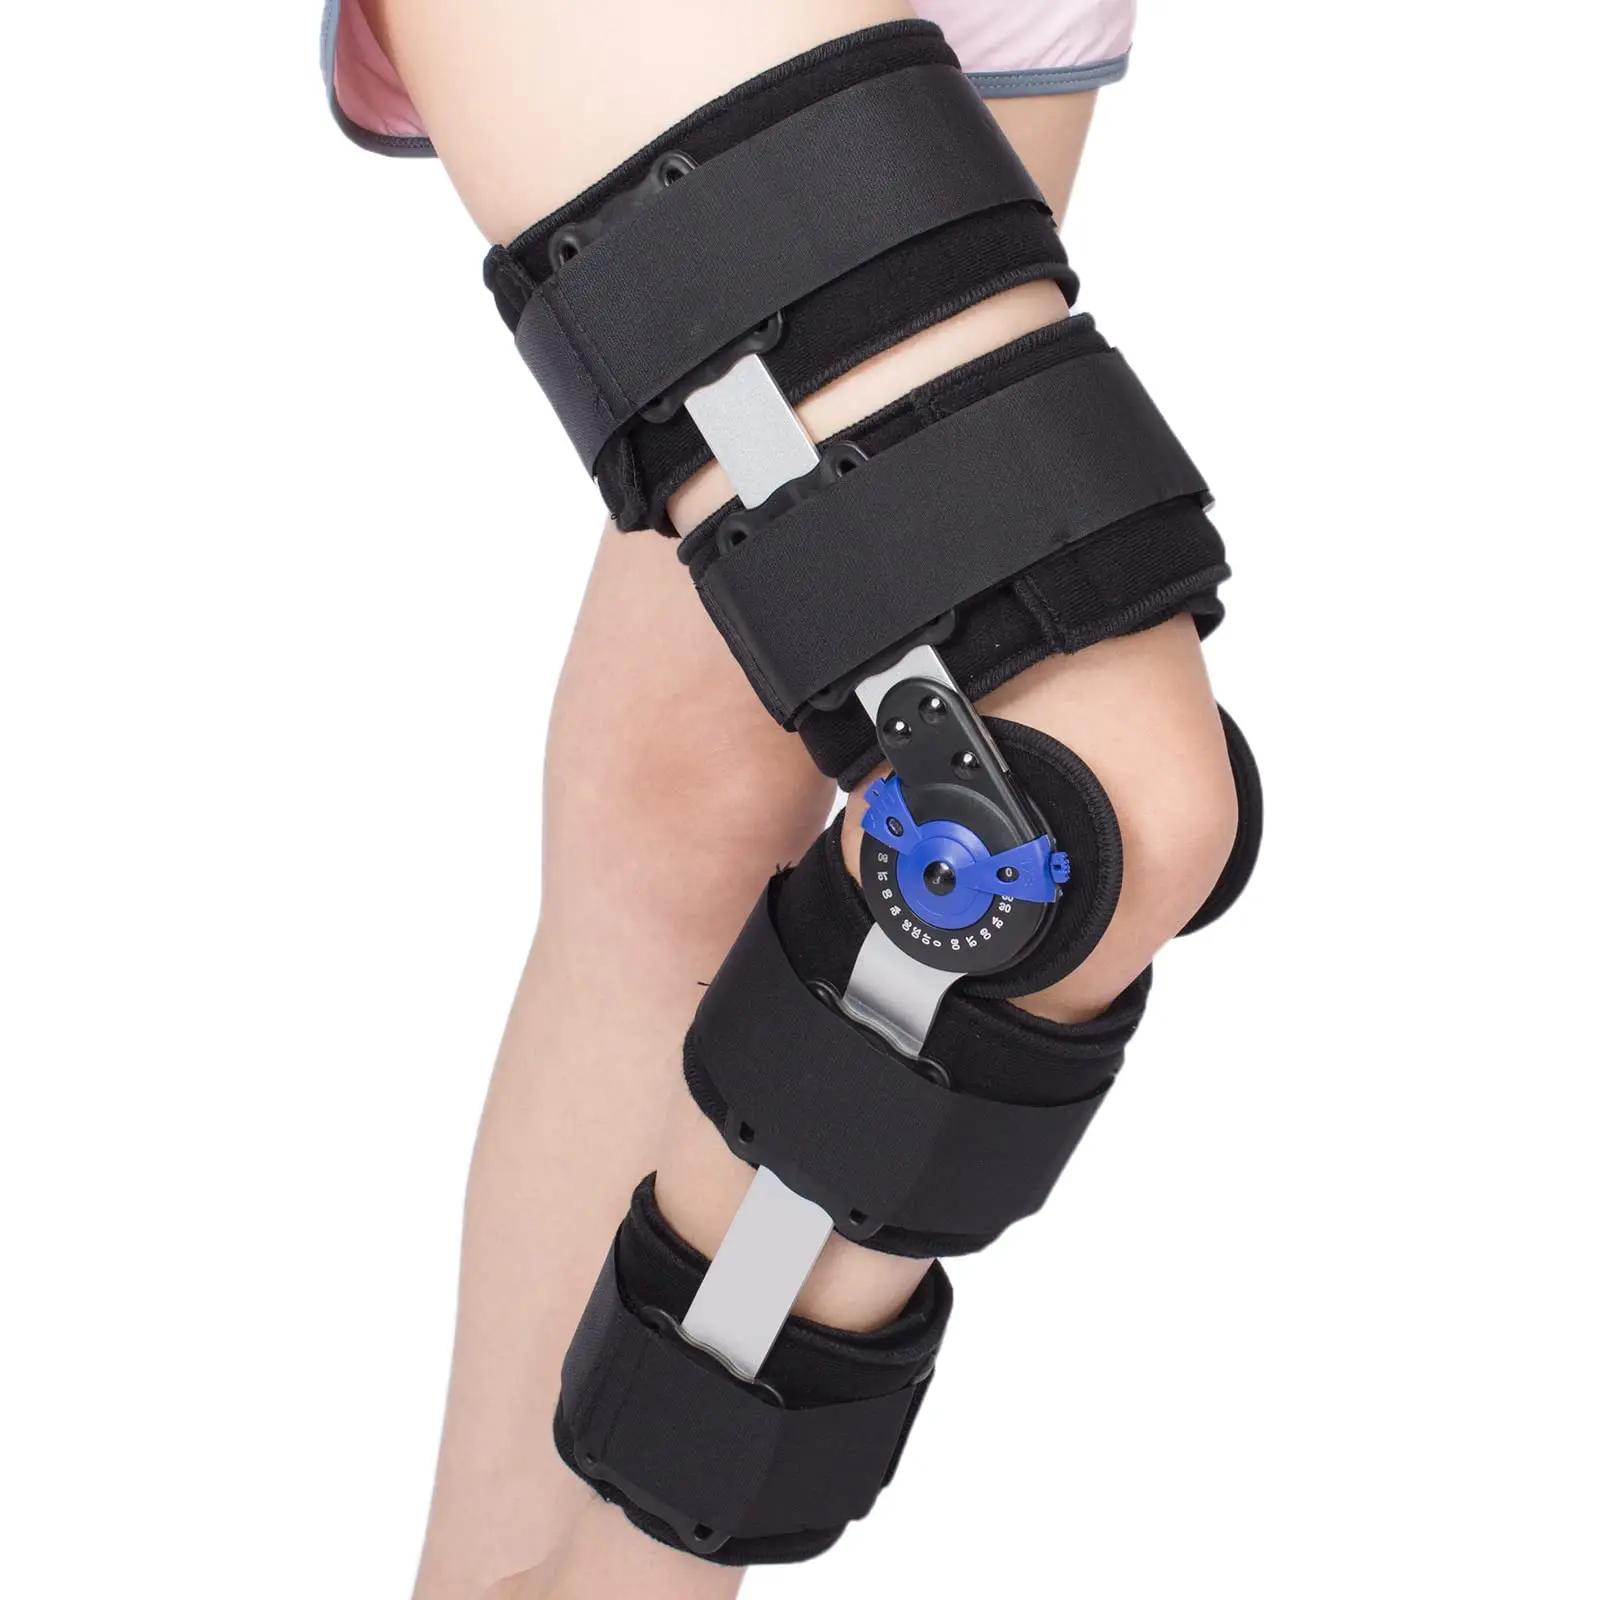 Tairibousy Hinged Knee Brace ROM Post Op Knee Immobilizer Adjustable Knee Immobilizer Support with Side Leg Stabilizers